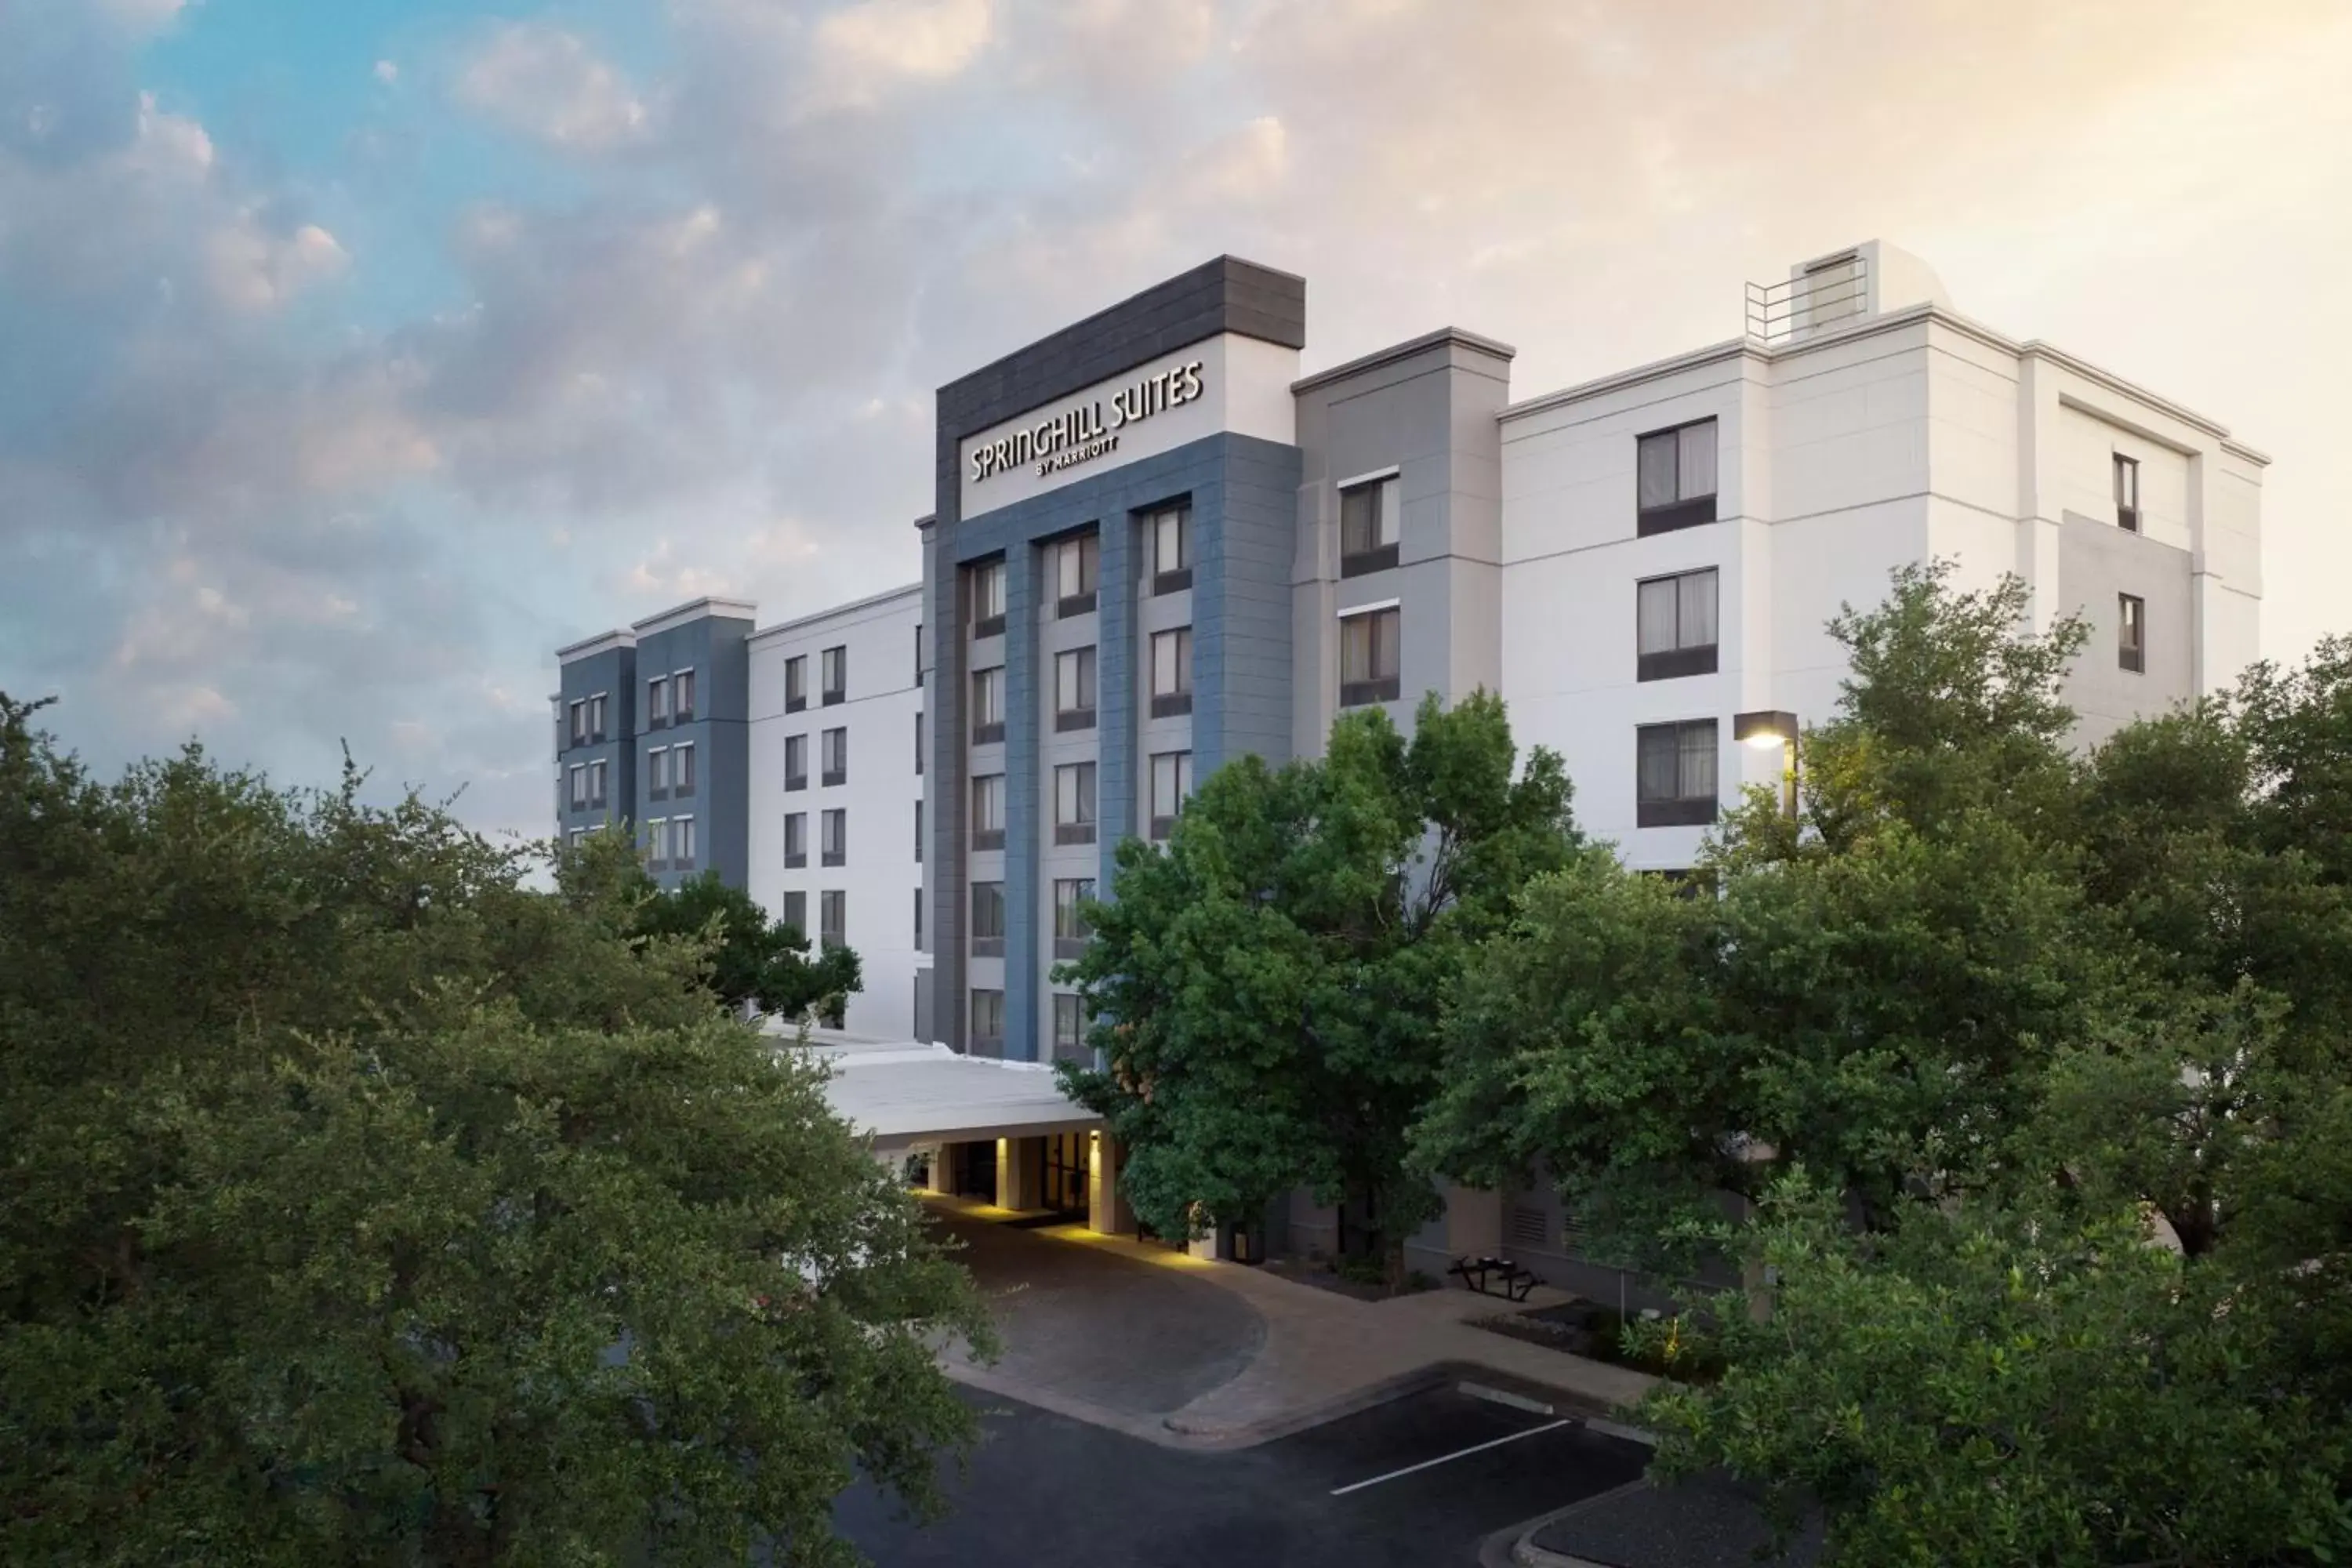 Property Building in SpringHill Suites Austin South